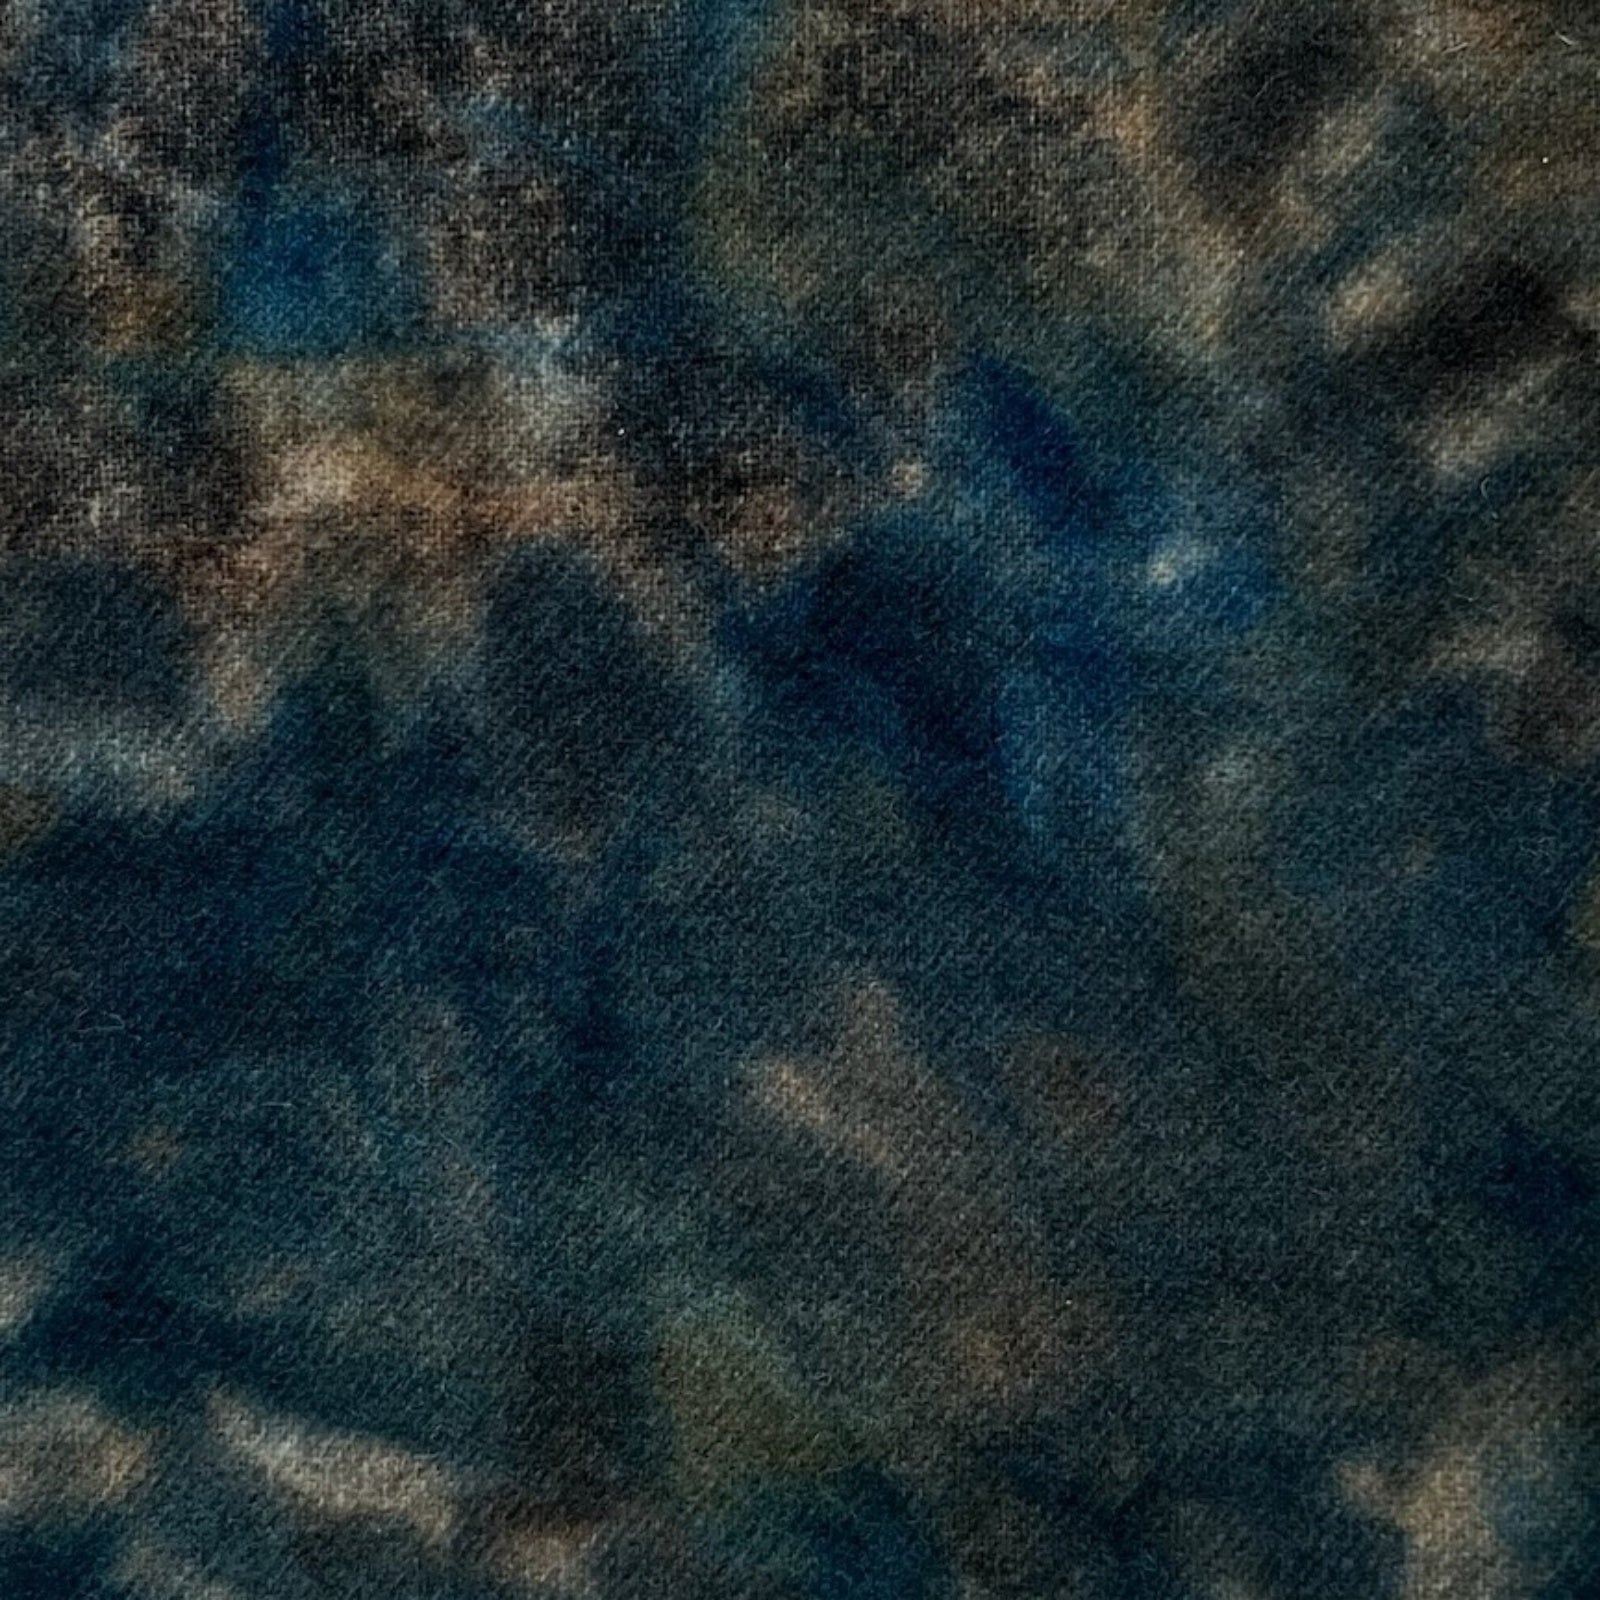 Blue Rocks A - Colorama Hand Dyed Wool - Offered by HoneyBee Hive Rug Hooking